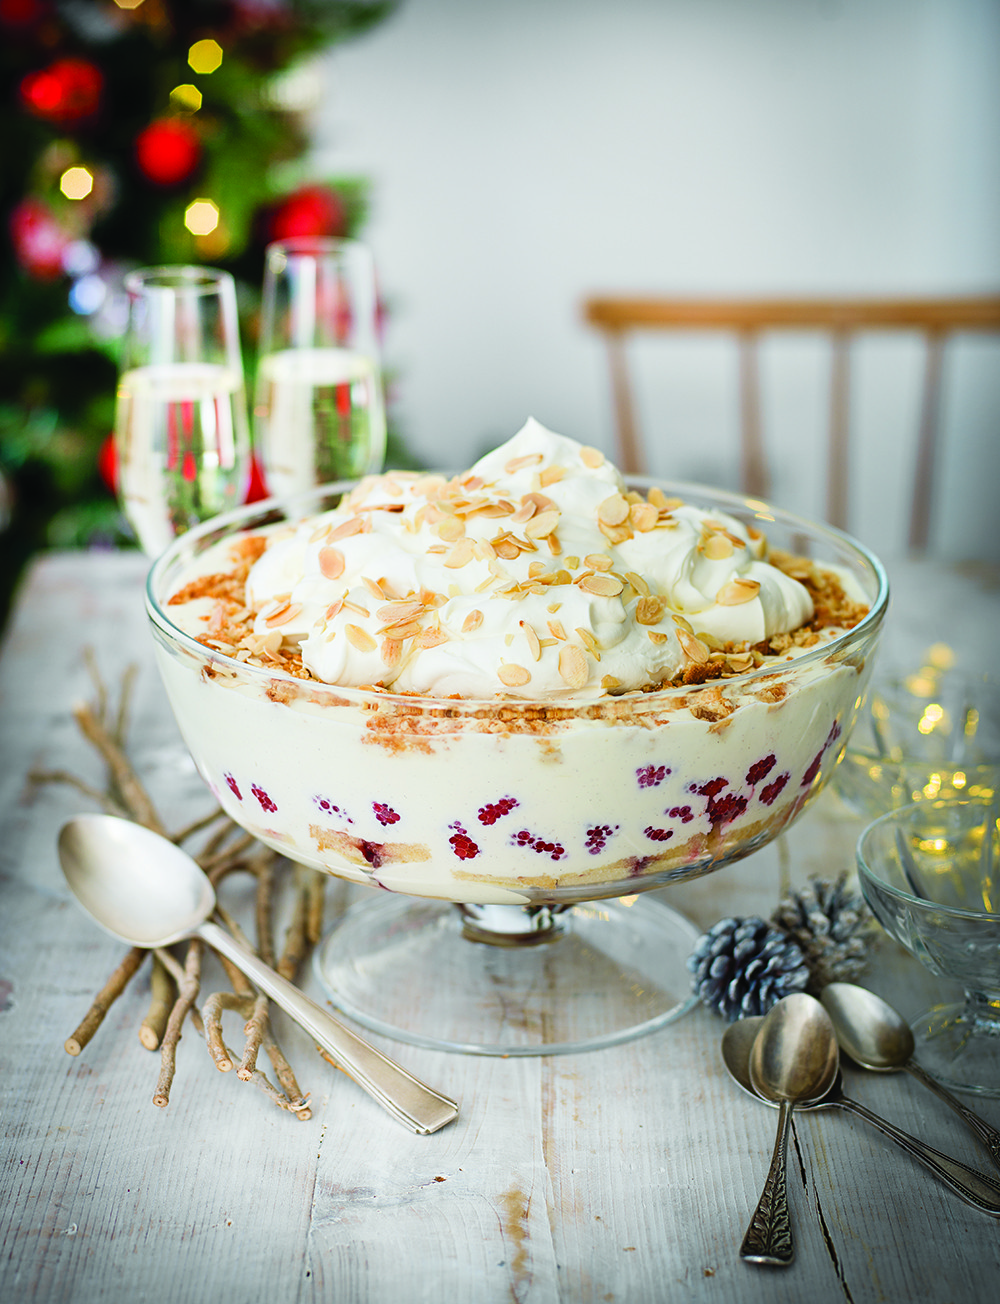 OLIVE’S ULTIMATE CHRISTMAS DINNERALEX’S AMERETTI TRIFLE